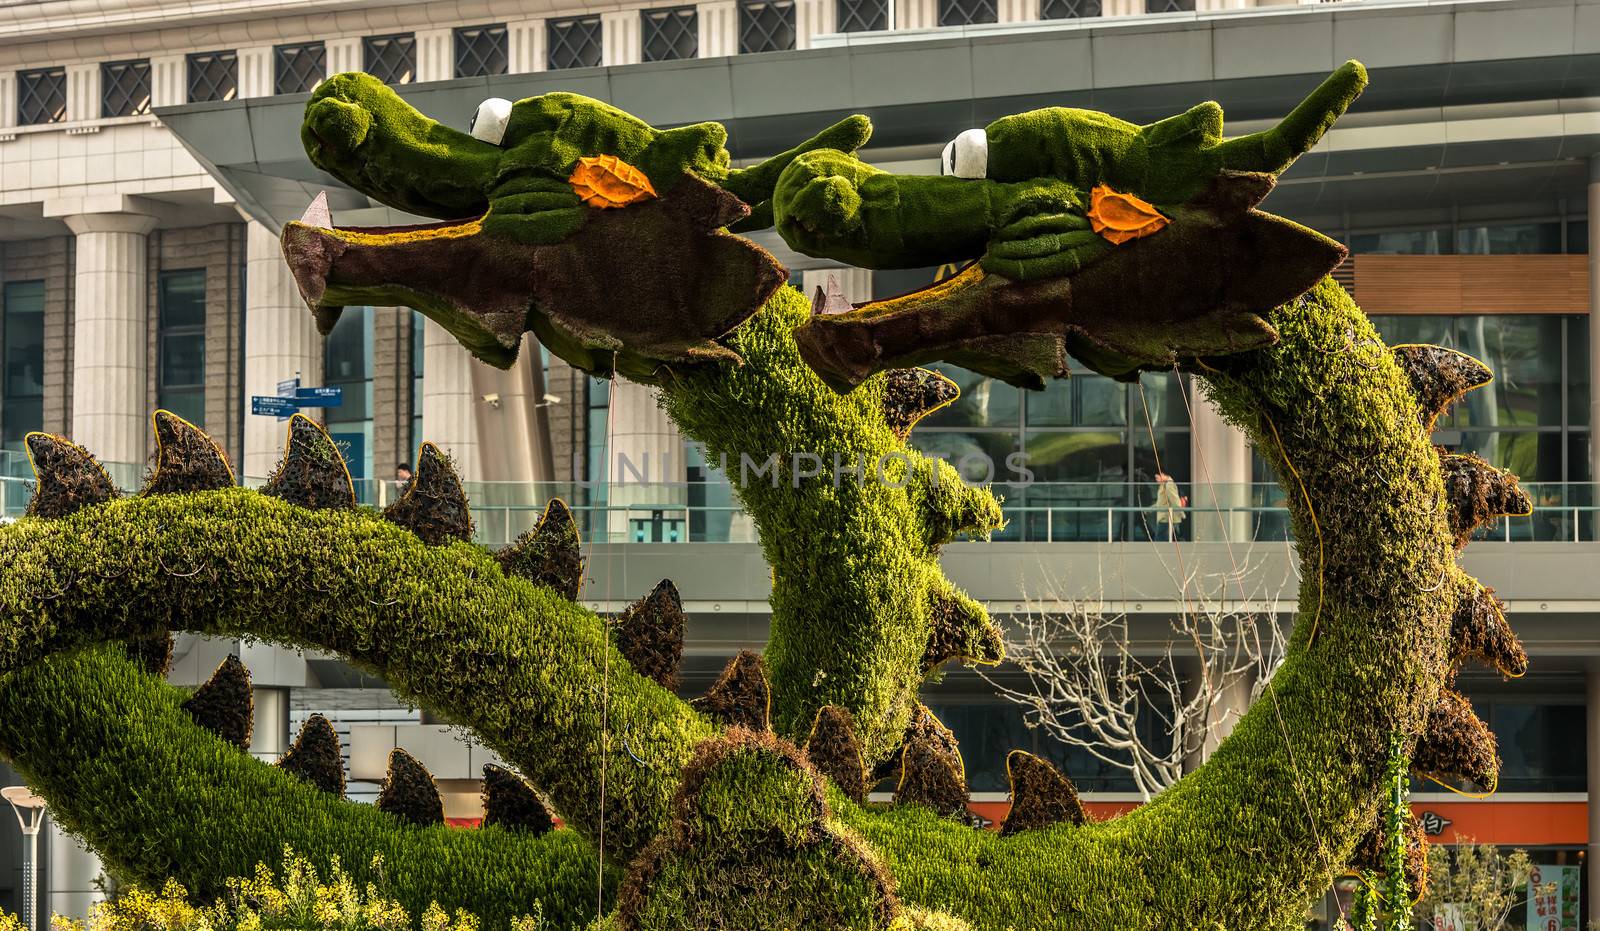 Shanghai, China - April 7, 2013: dragons sculptured trees in pudong at the city of Shanghai in China on april 7th, 2013